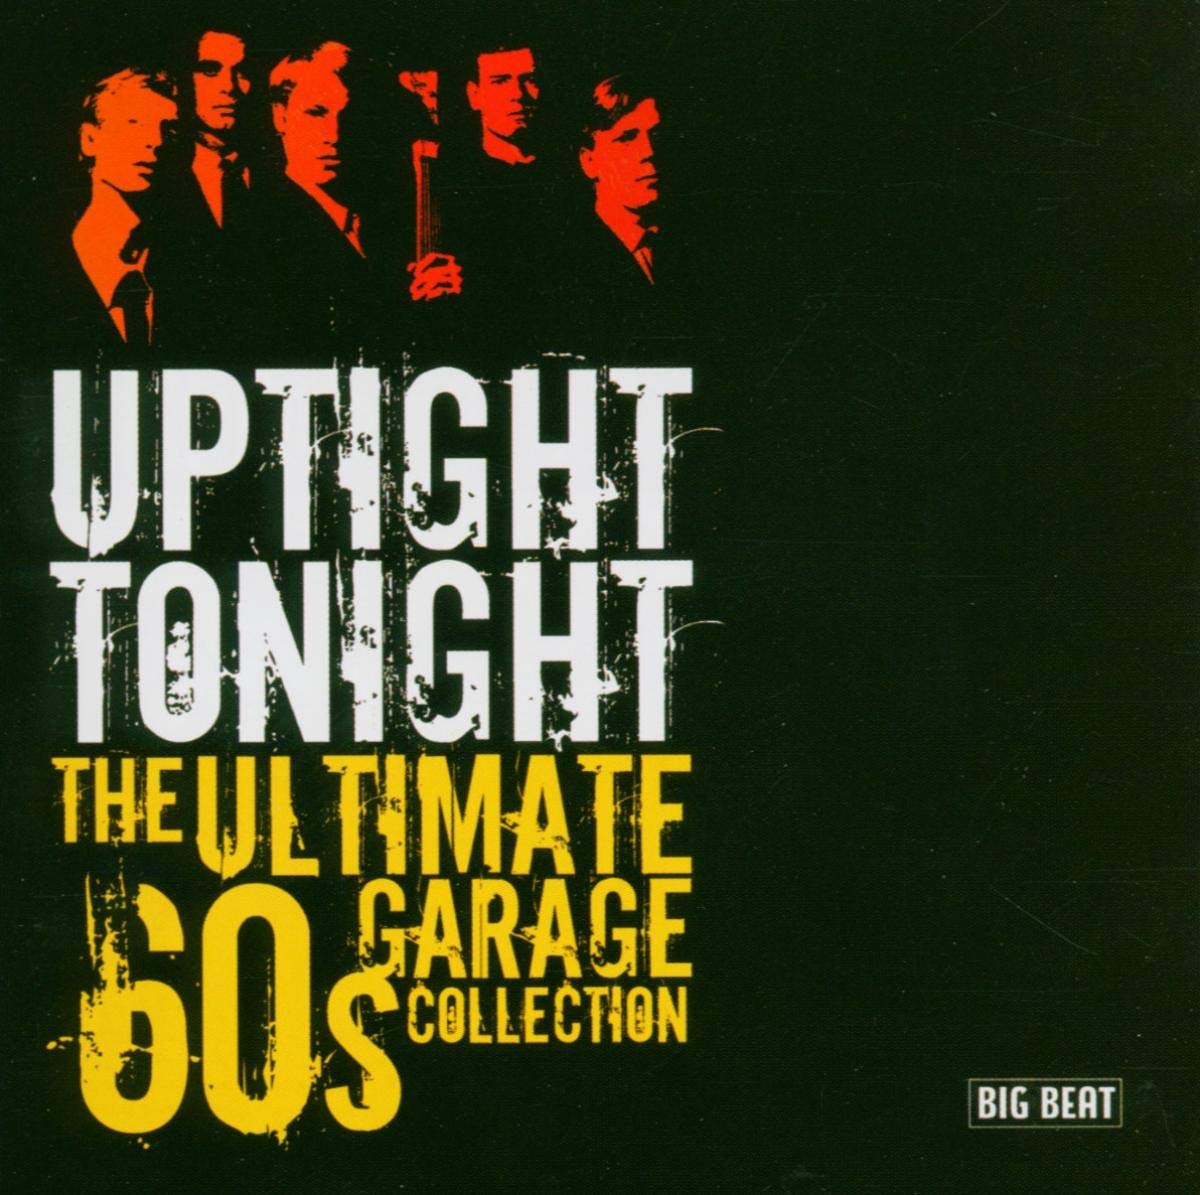 Collection 2005. 60 Ultimate collection. Uptight. 60 Garage Rock. Uptight перевод.